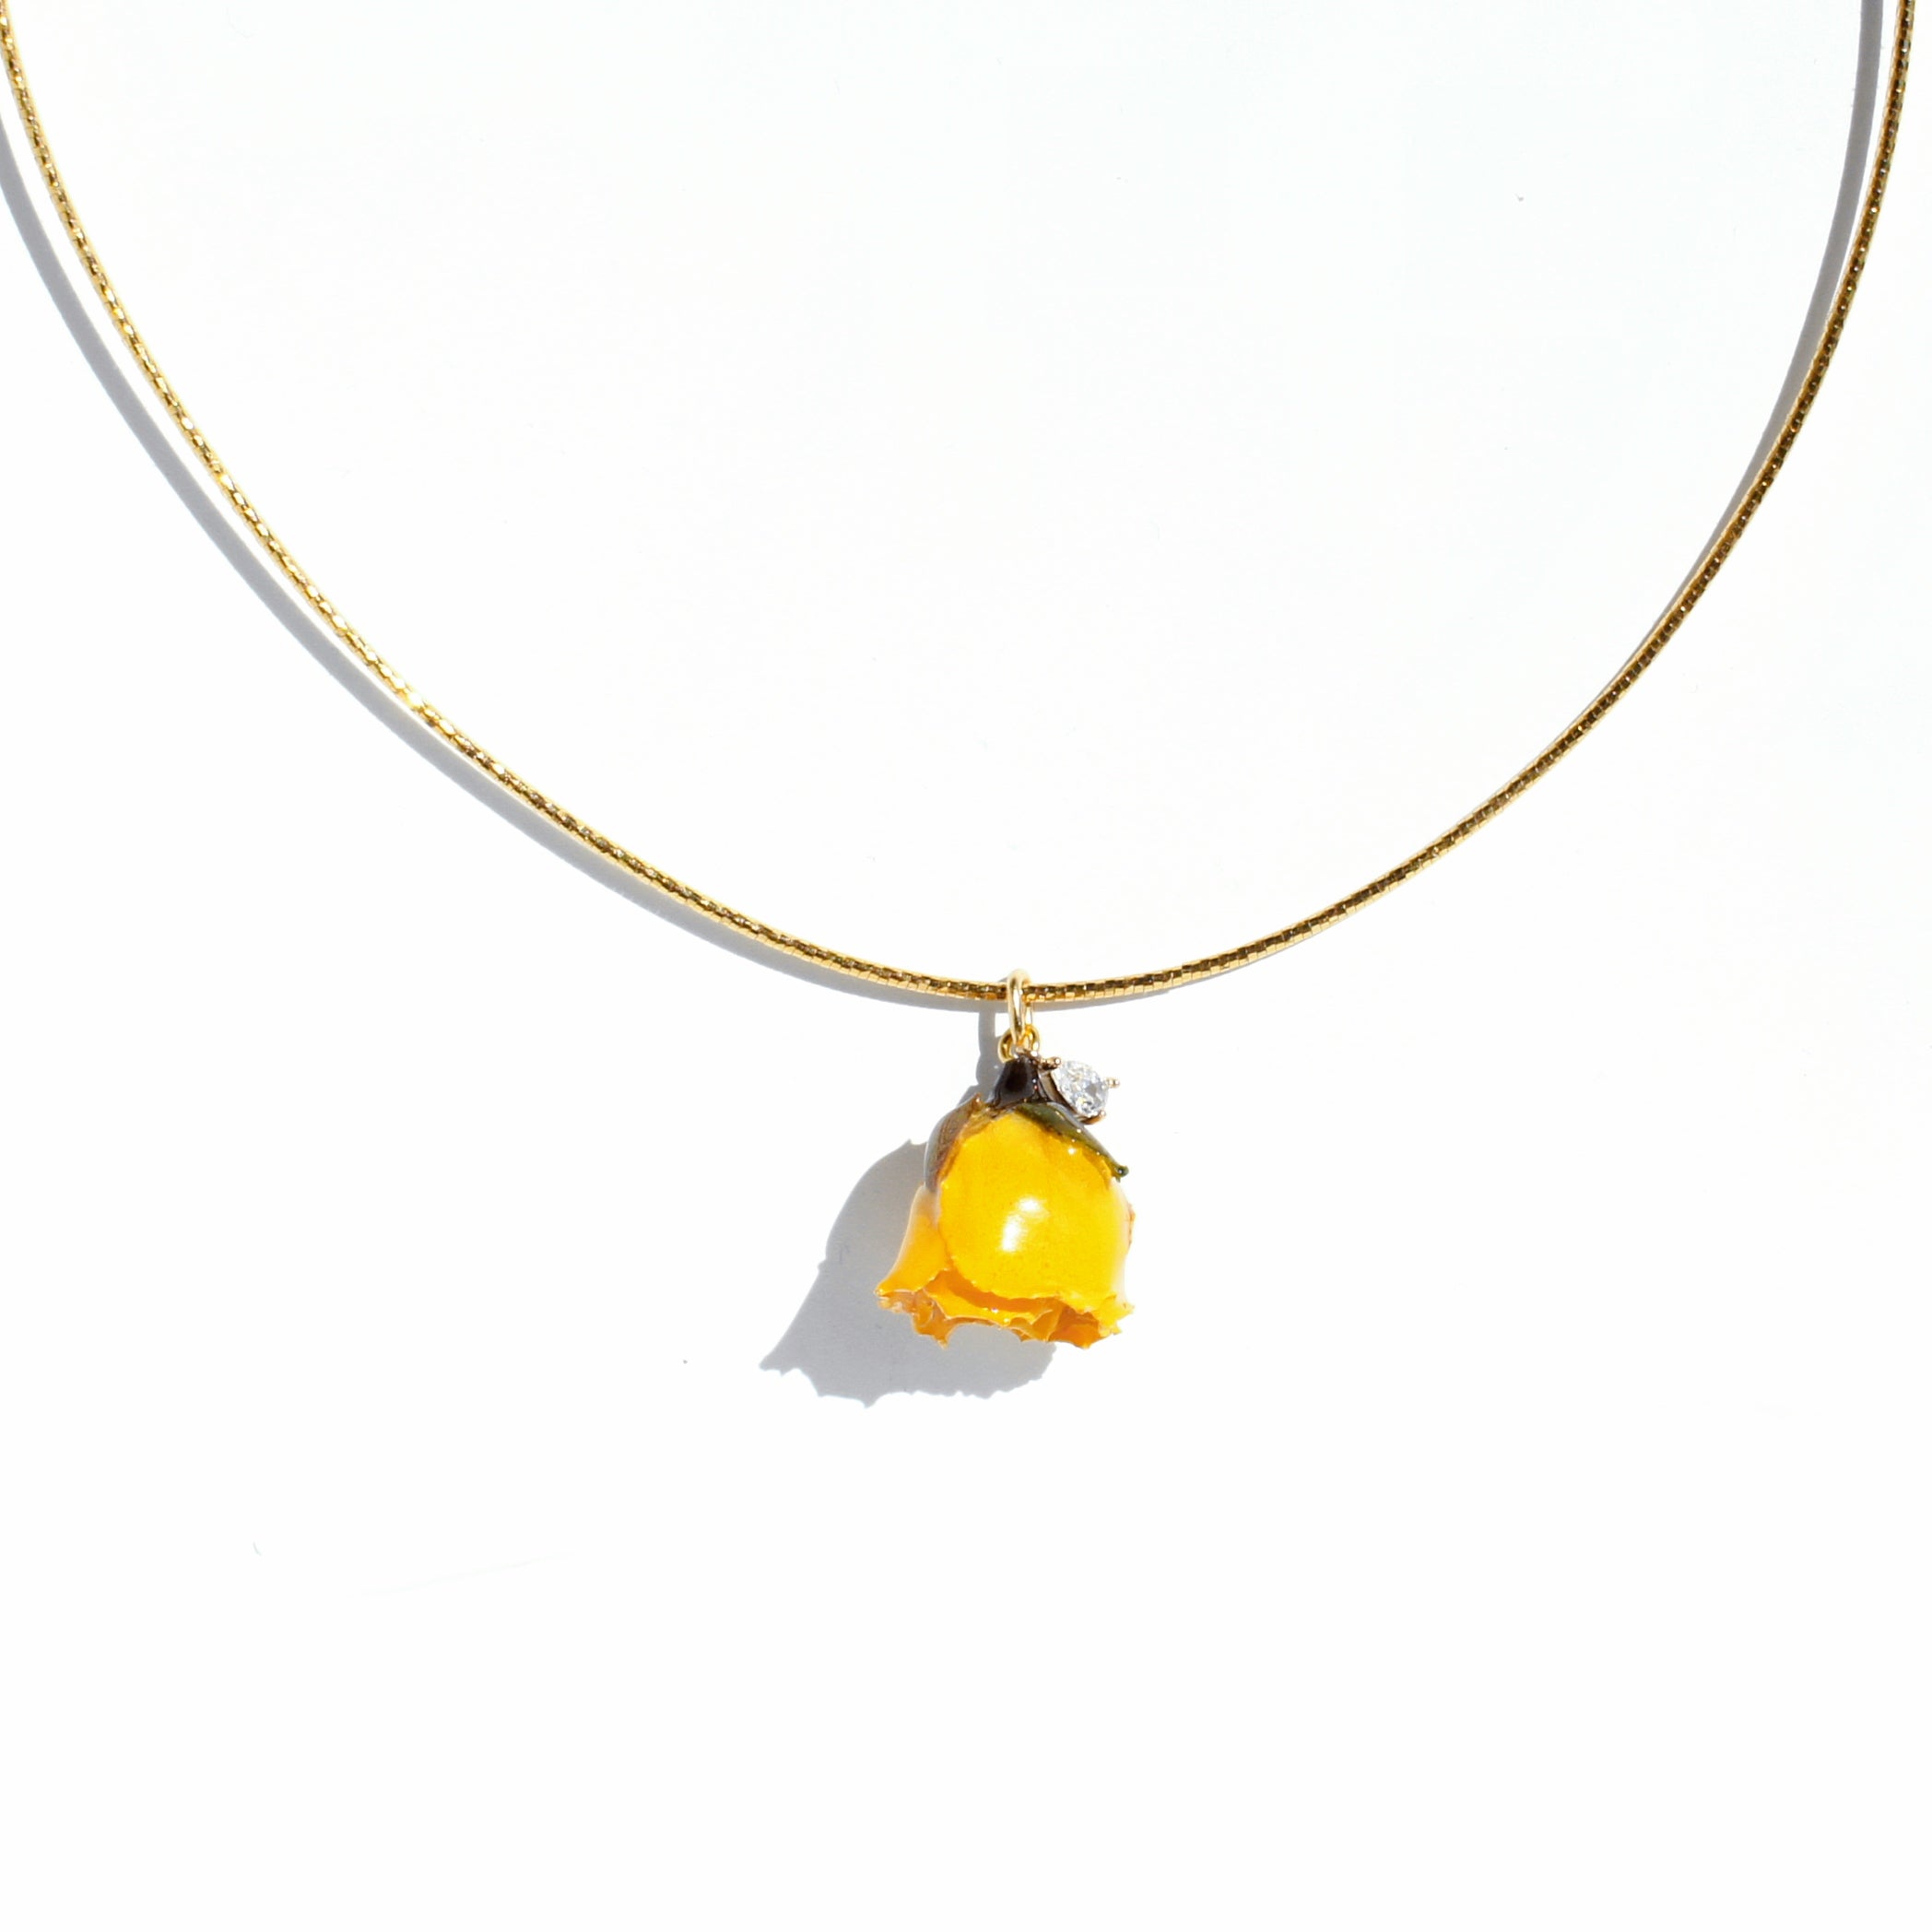 *REAL FLOWER* Rosa Korresia Necklace with Yellow Rosebud Pendant